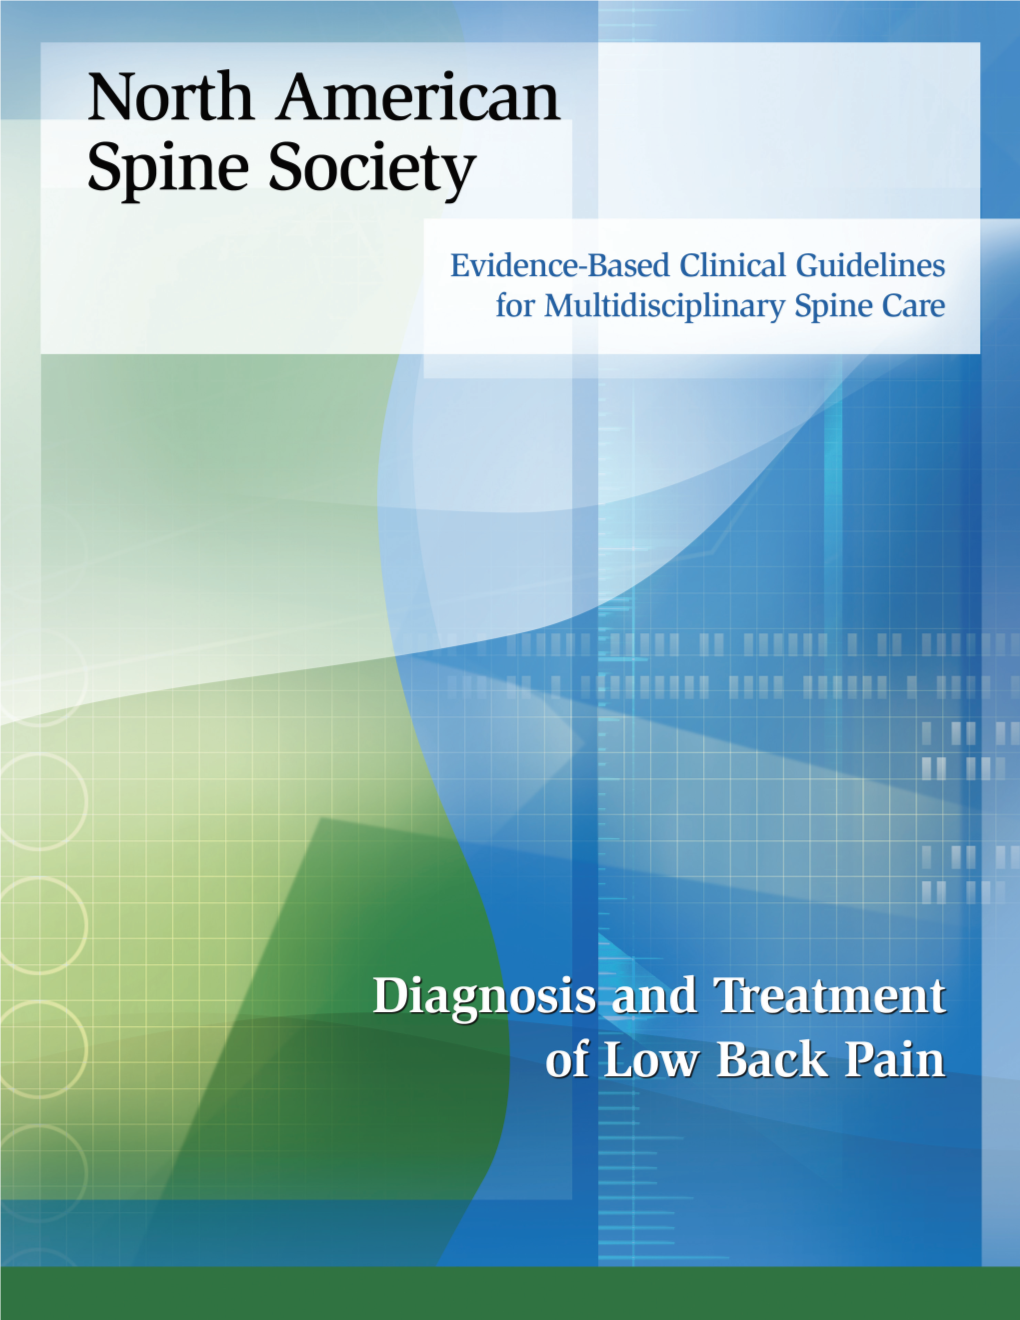 Diagnosis and Treatment of Low Back Pain